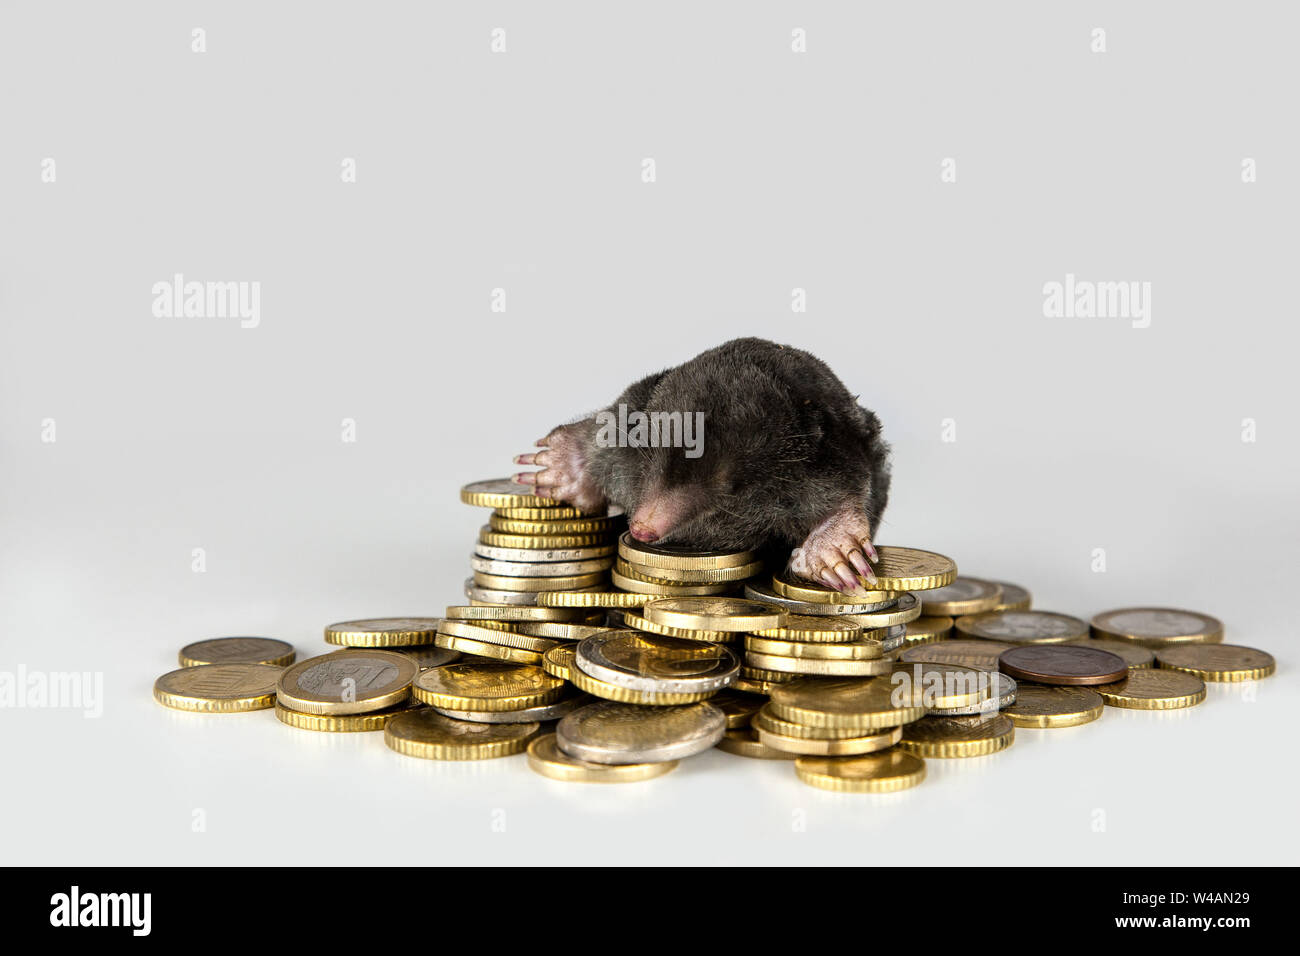 The mole in the financial system. A mole sits on a pile of euro coins. Stock Photo